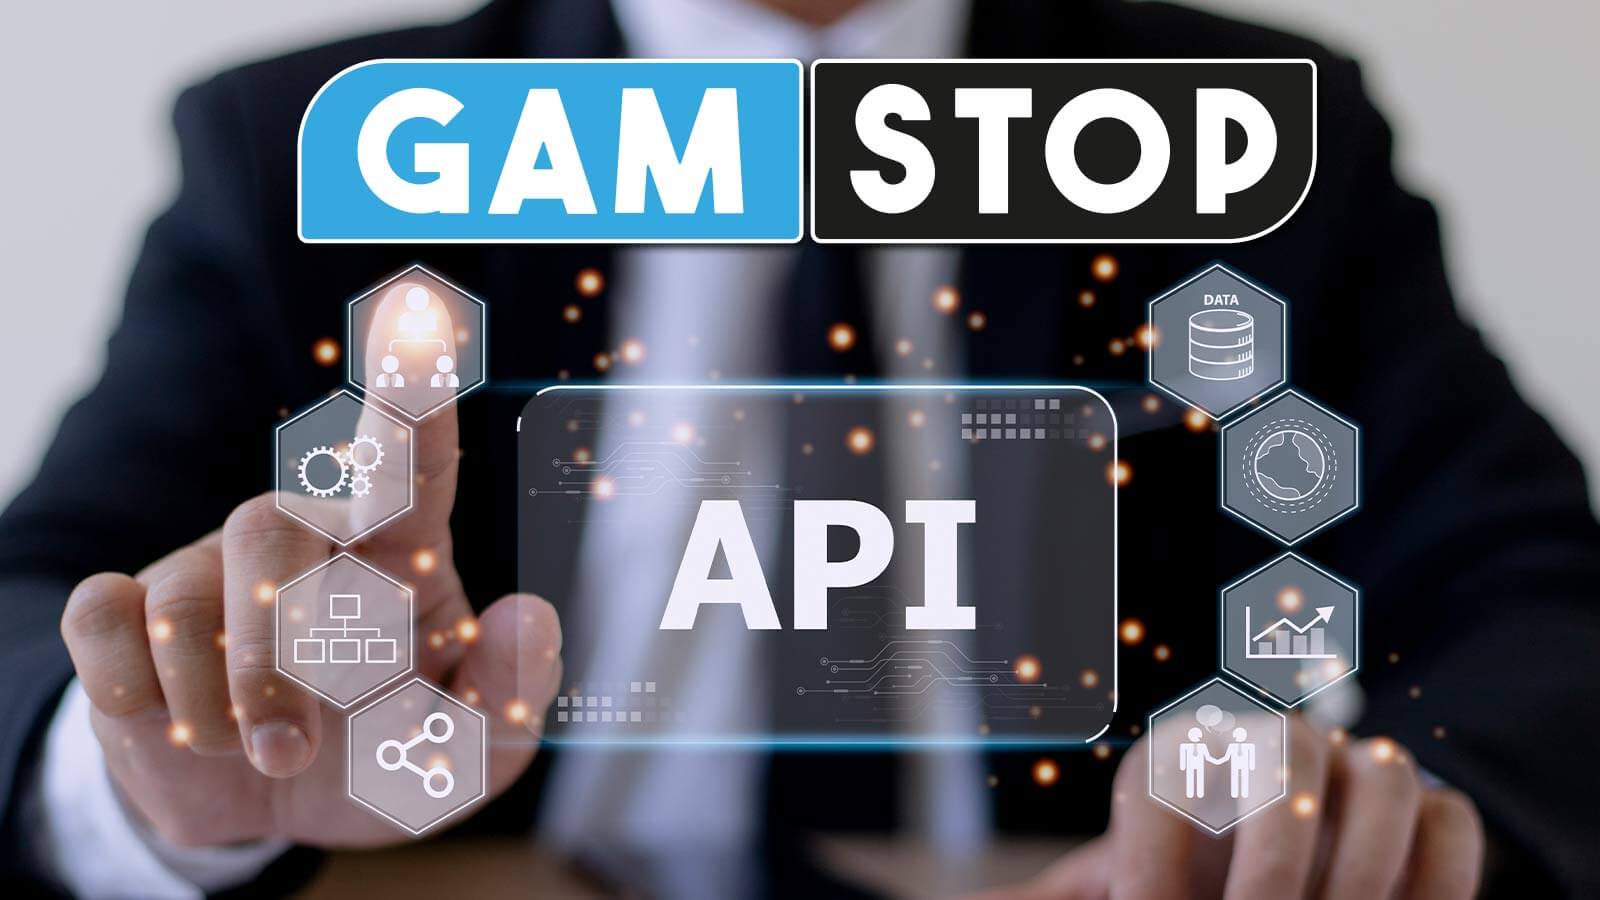 Gamstop API – the advanced filtering system for marketing lists